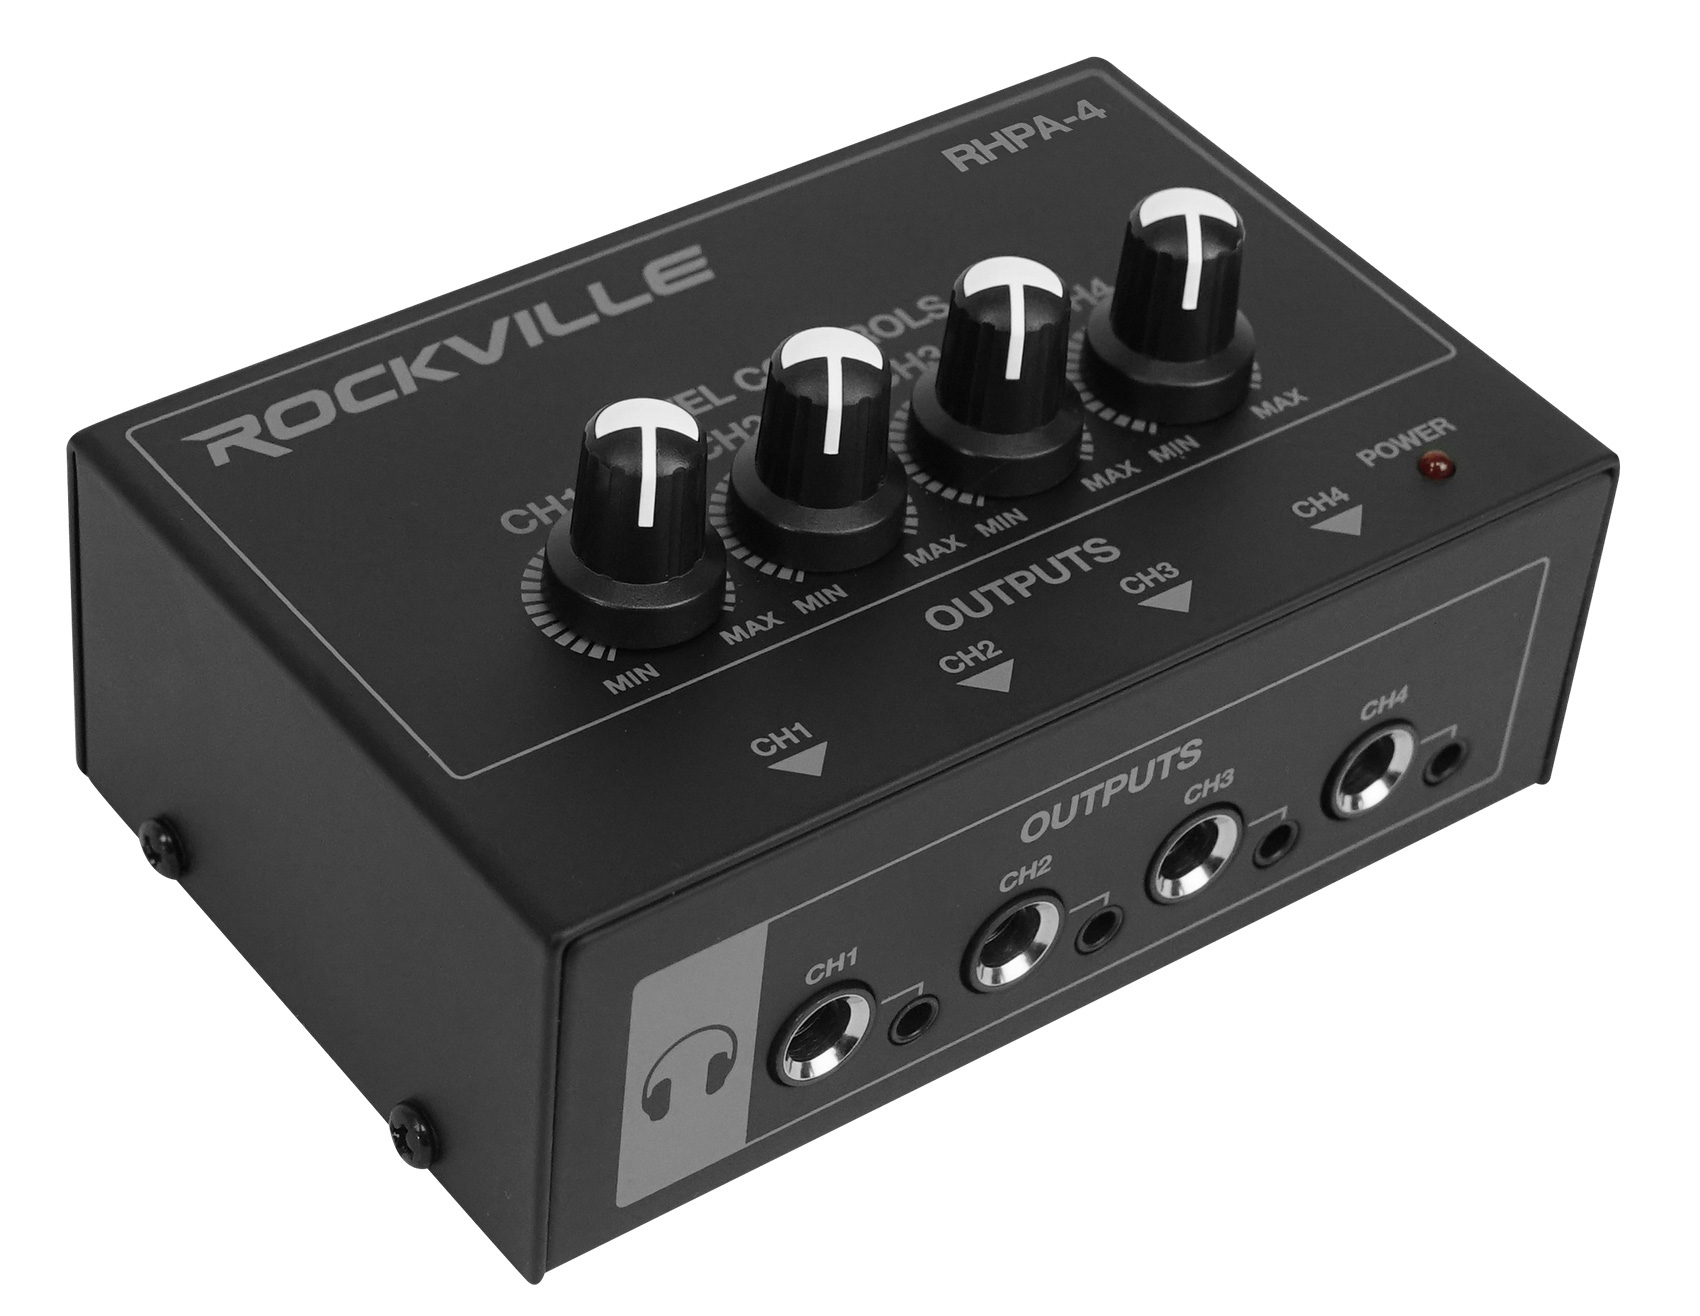 Rockville RHPA4 4 Channel Professional Headphone Amplifier Stereo or ...